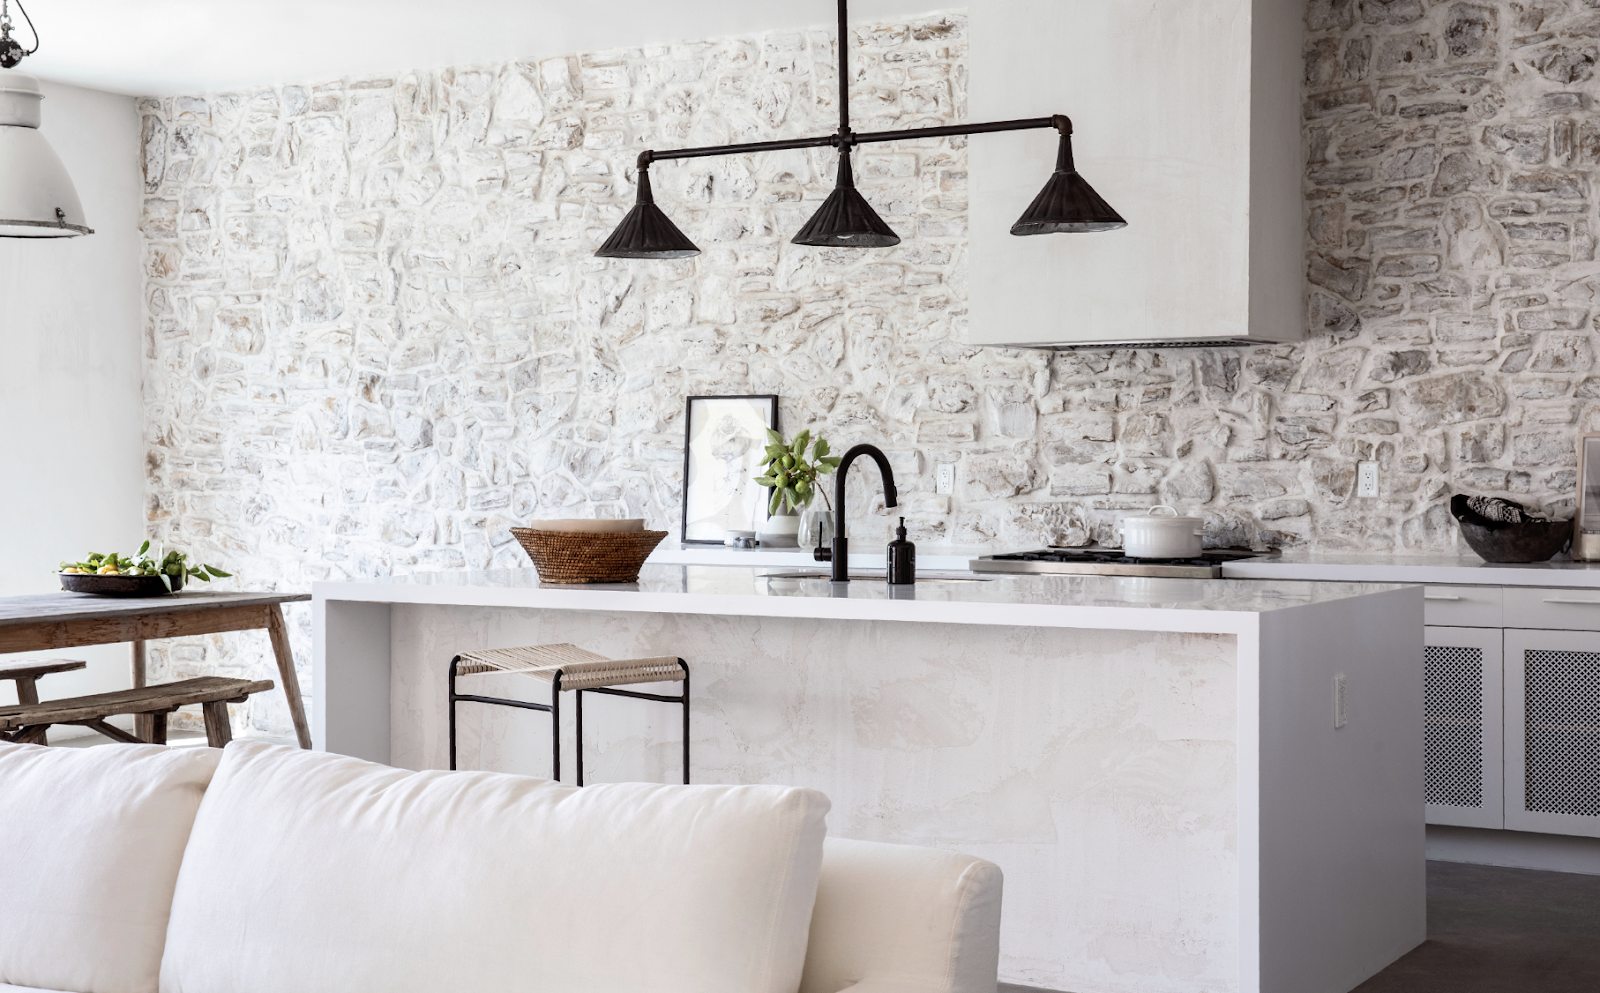 kitchen trend natural stone wall unexpected touch industrial lighting atlanta interiors tara fust